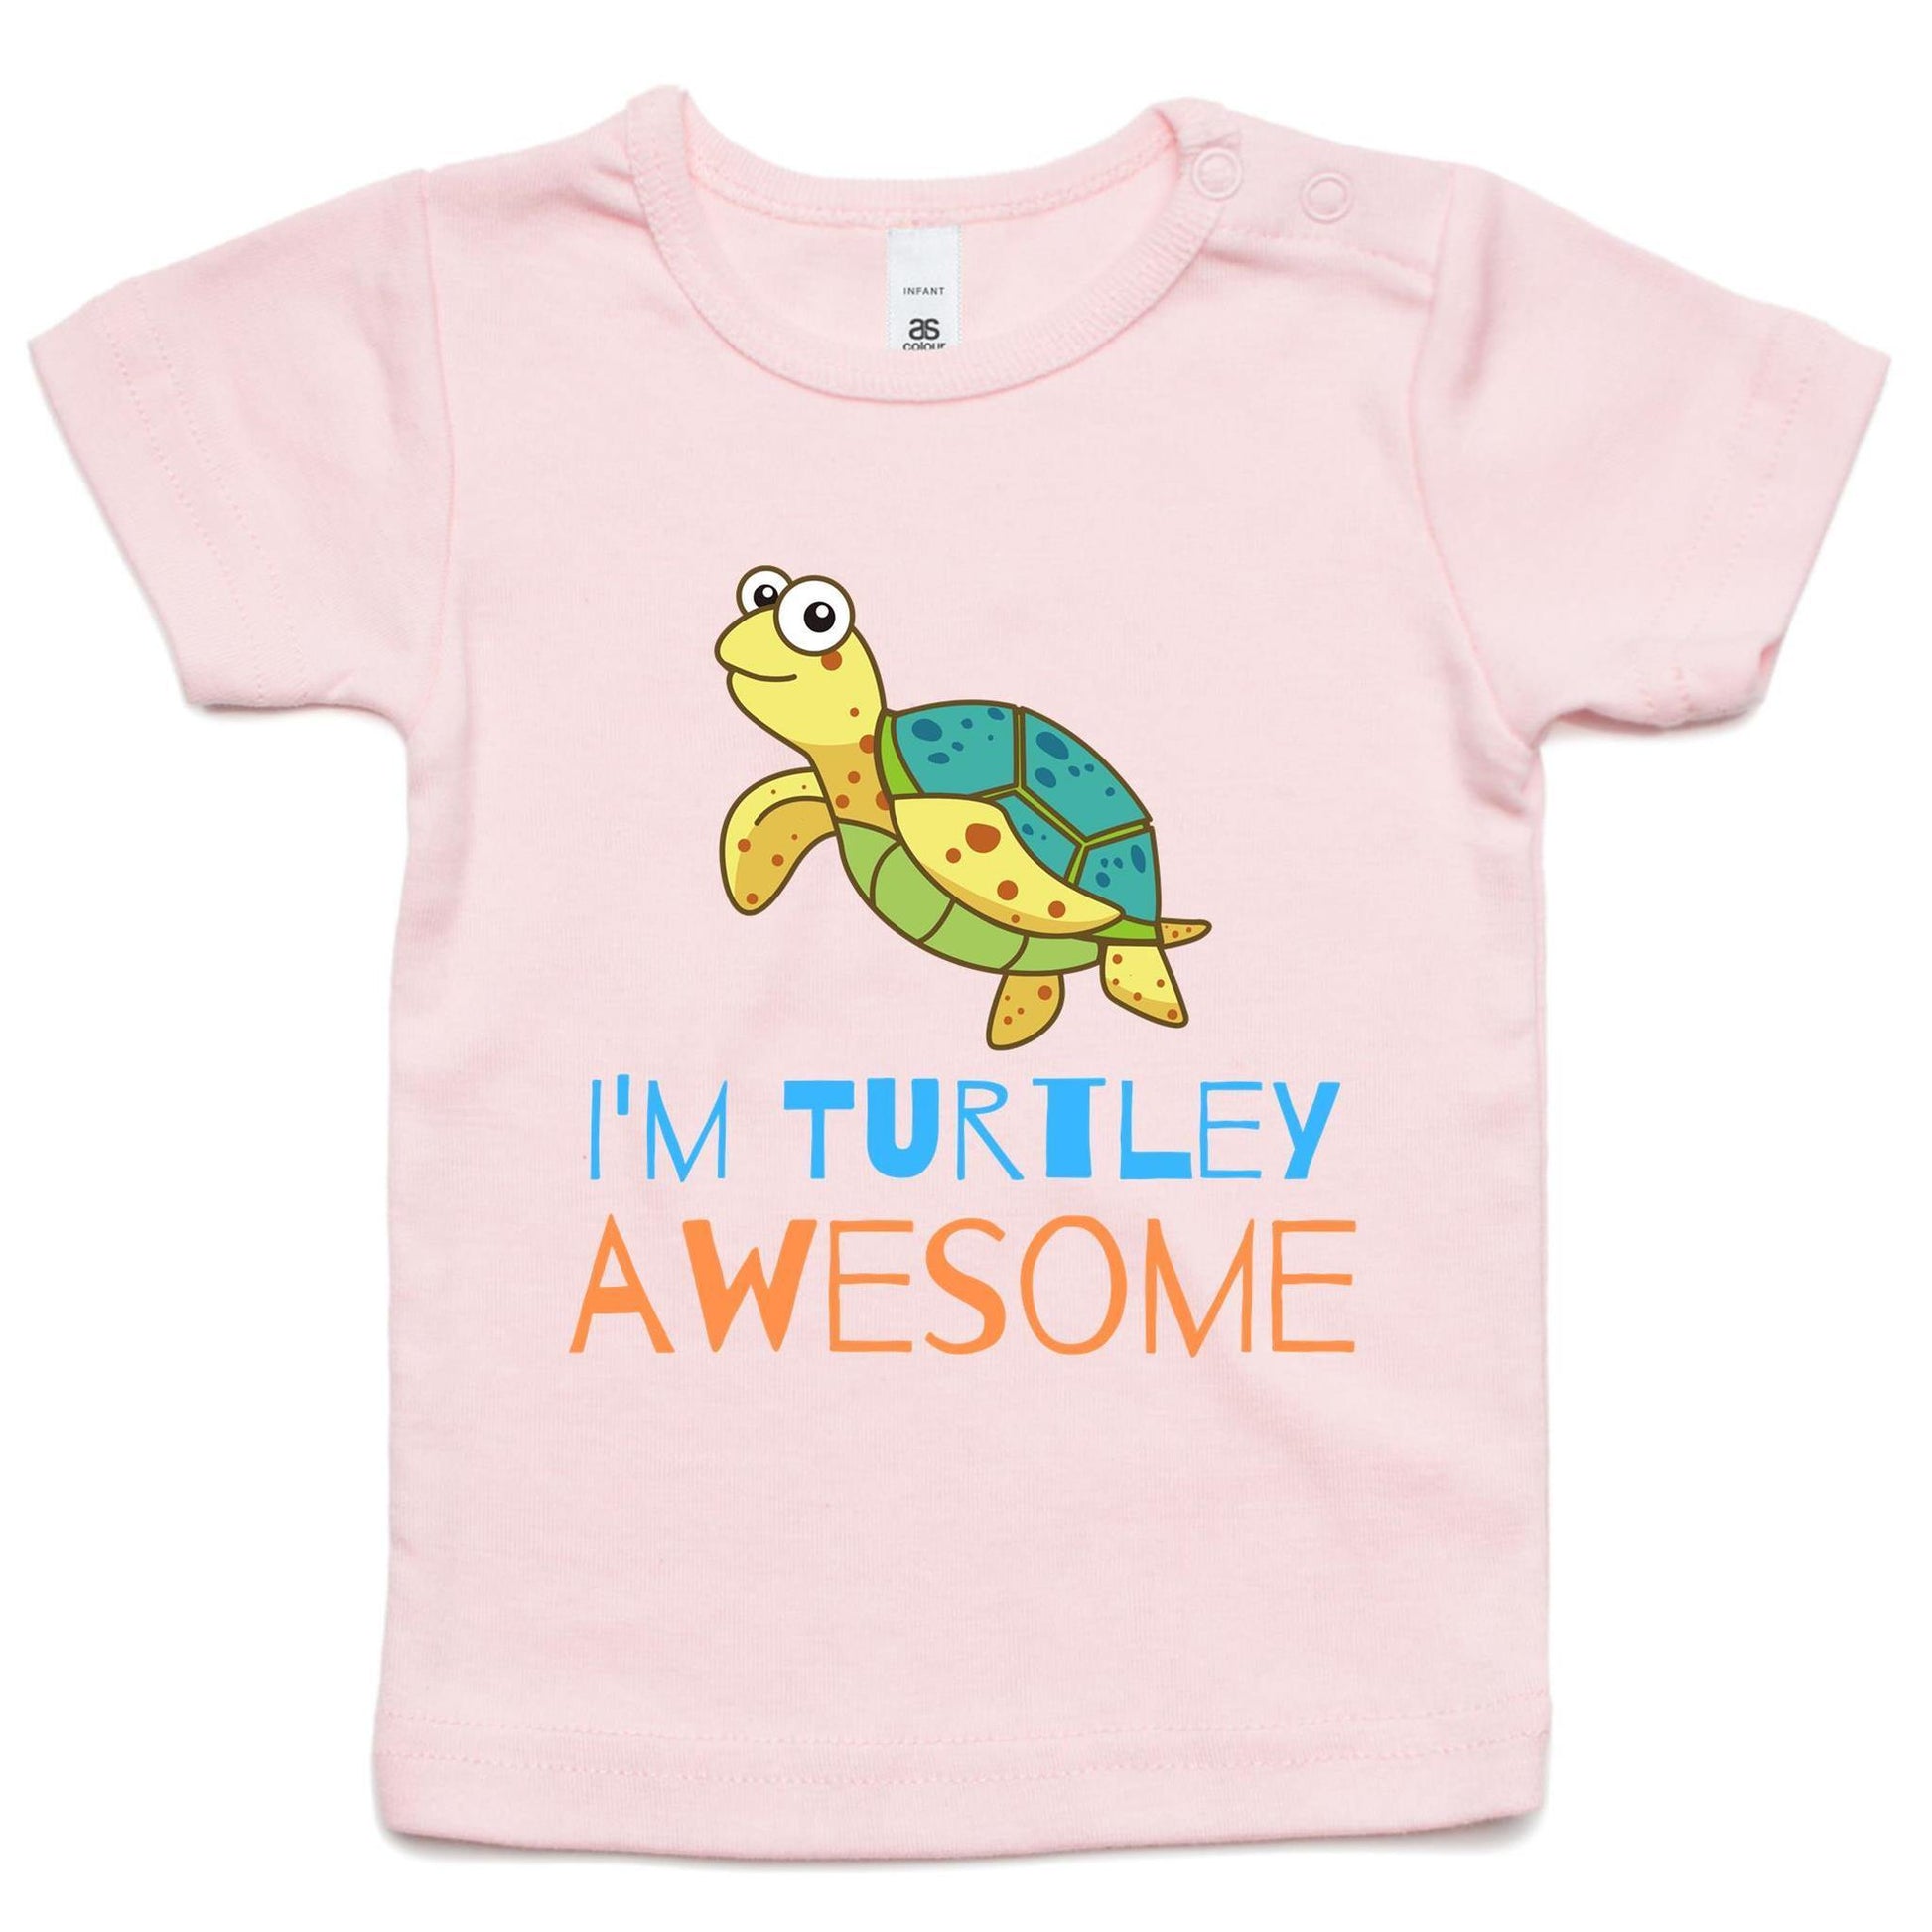 I'm Turtley Awesome - Baby T-shirt Pink Baby T-shirt animal kids